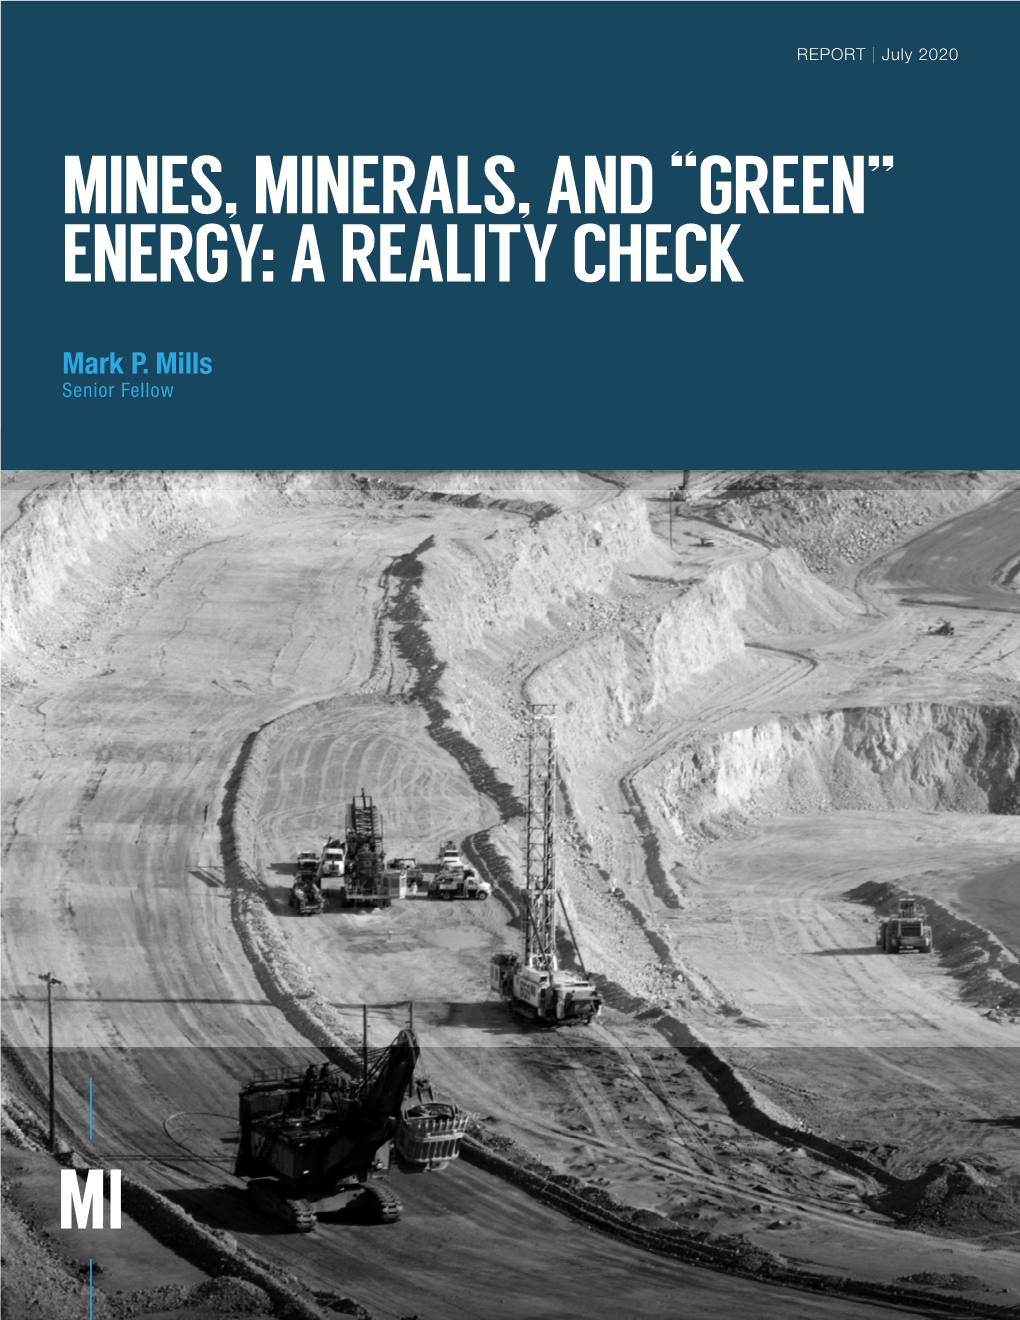 Mines, Minerals, and “Green” Energy: a Reality Check